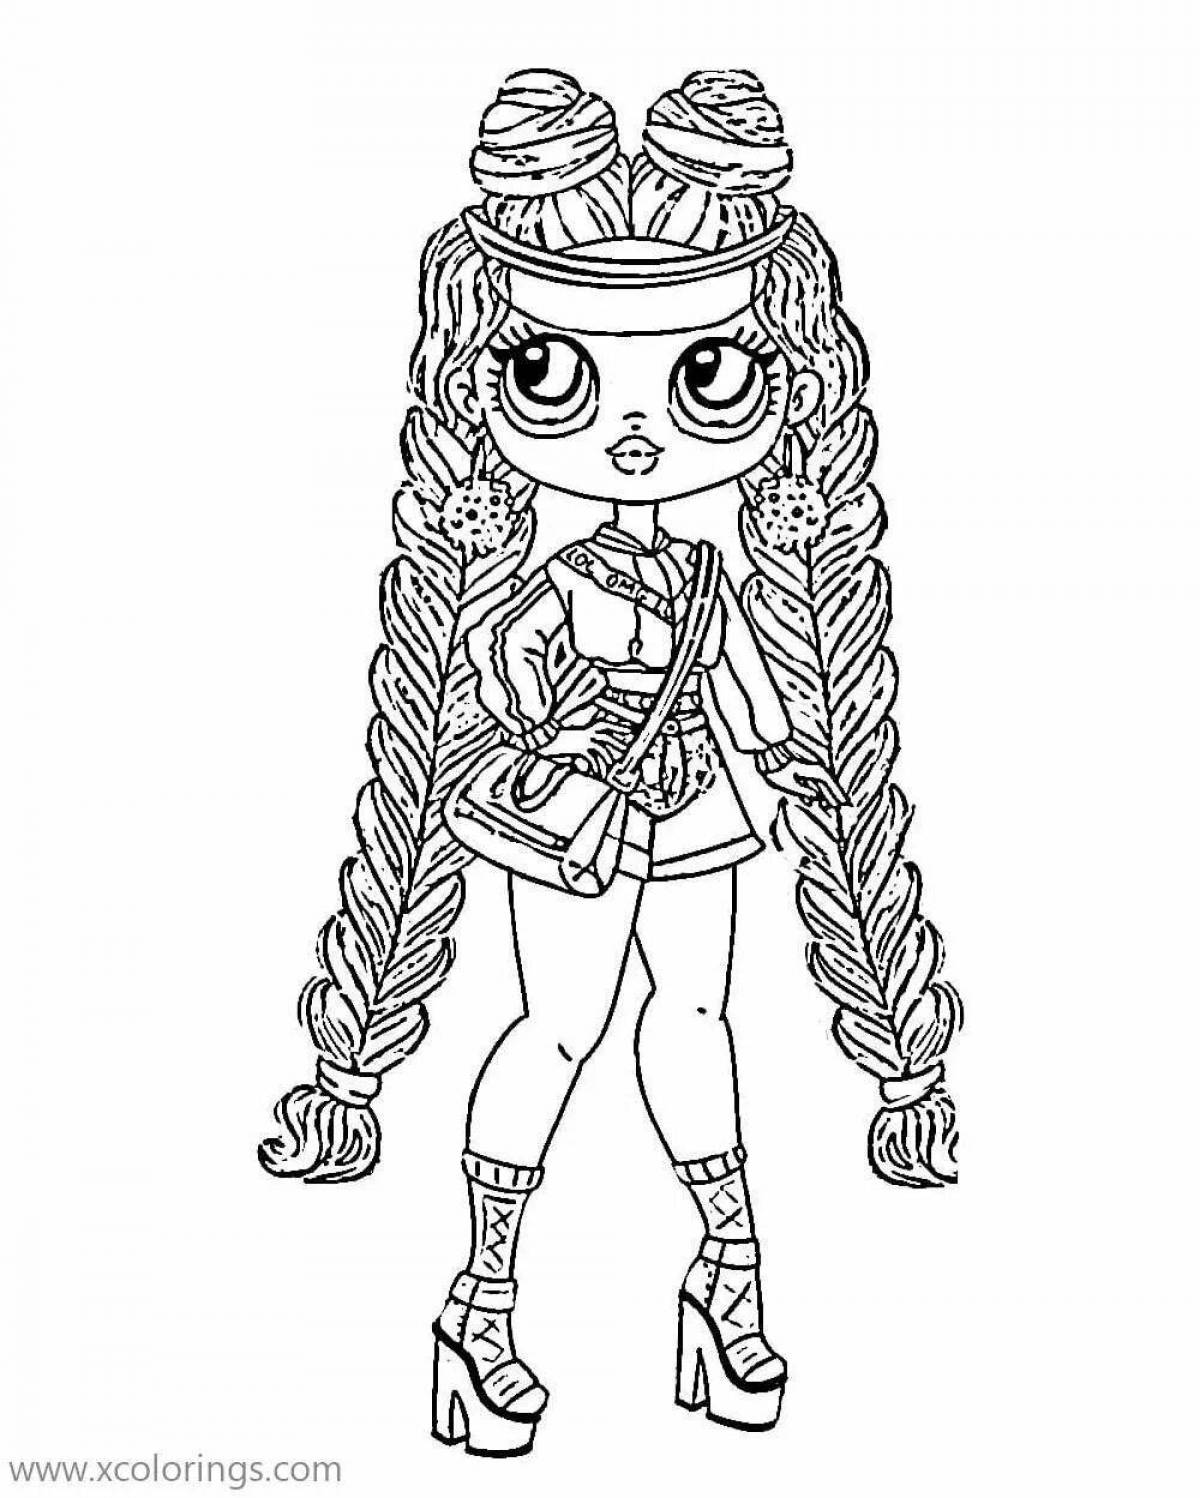 Lovely omg dolls coloring pages